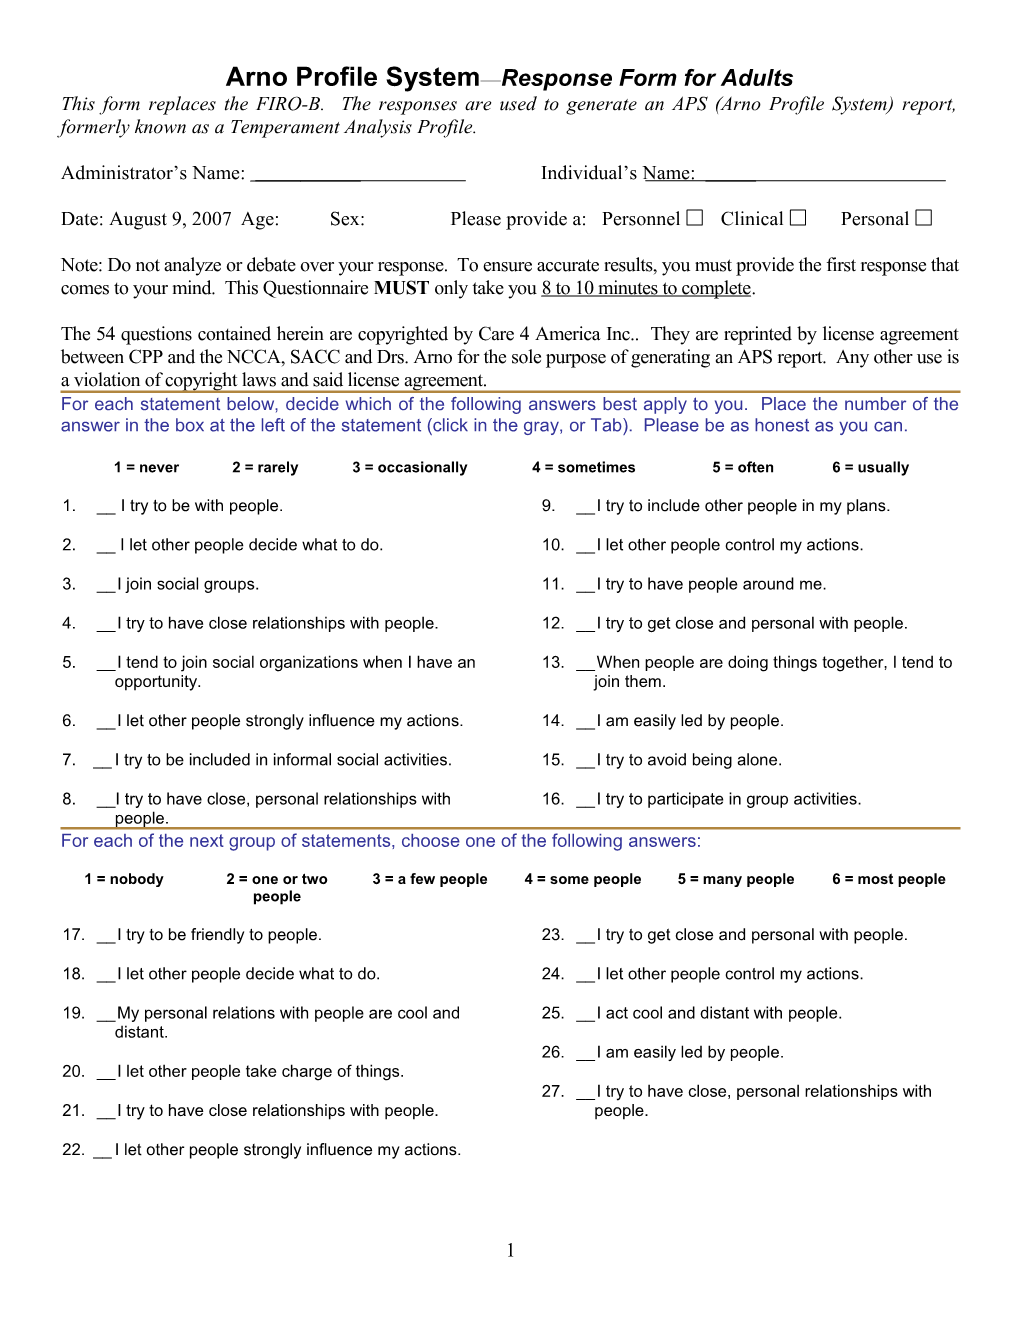 Arno Profile System Response Form for Adults